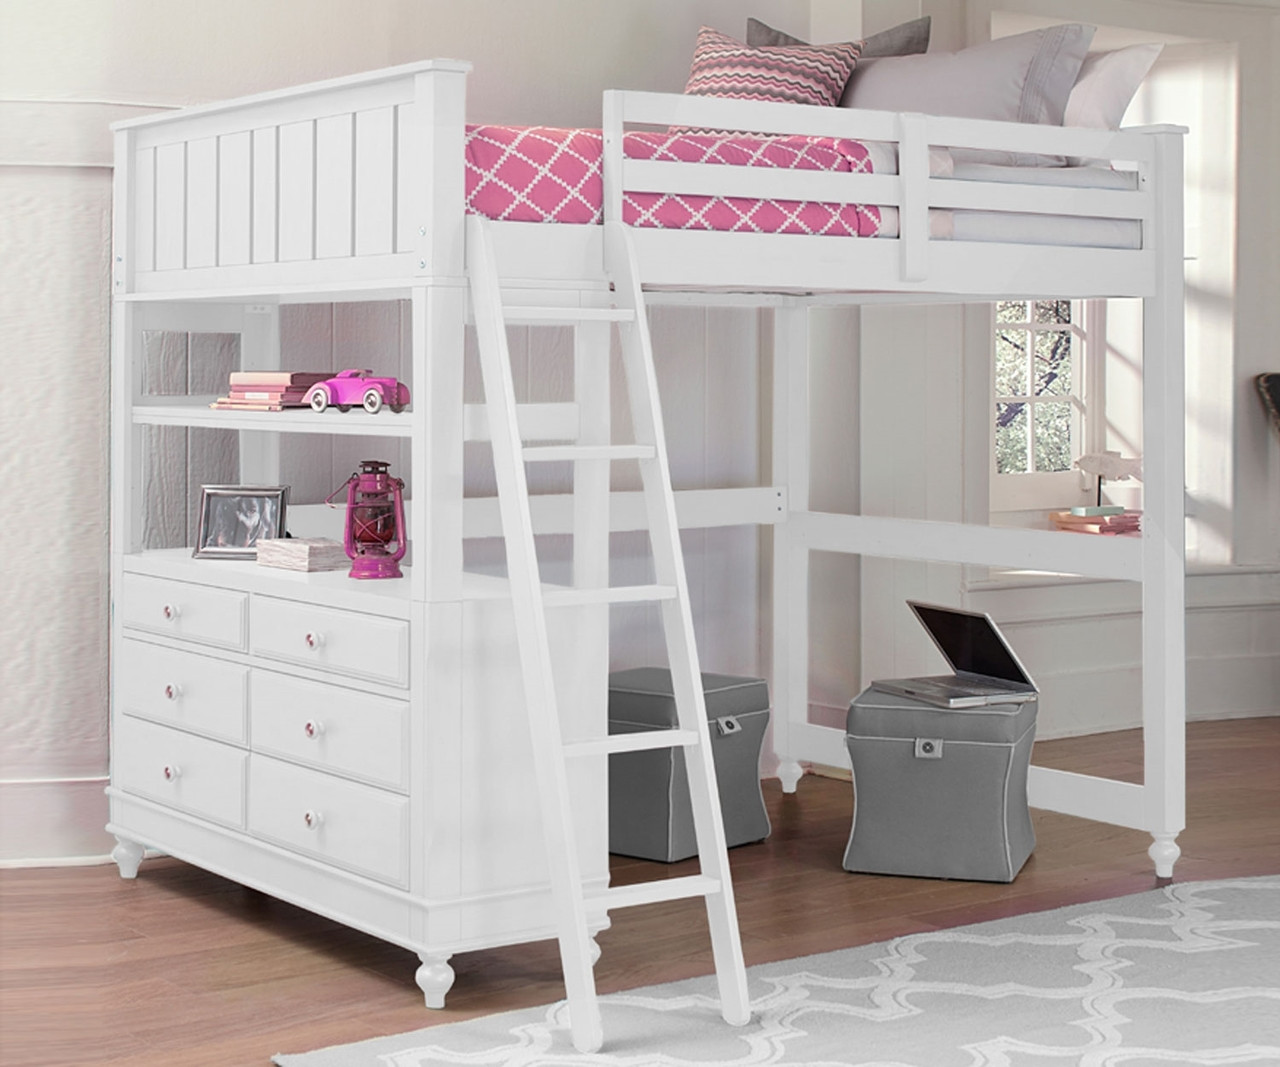 kids full size bunk beds